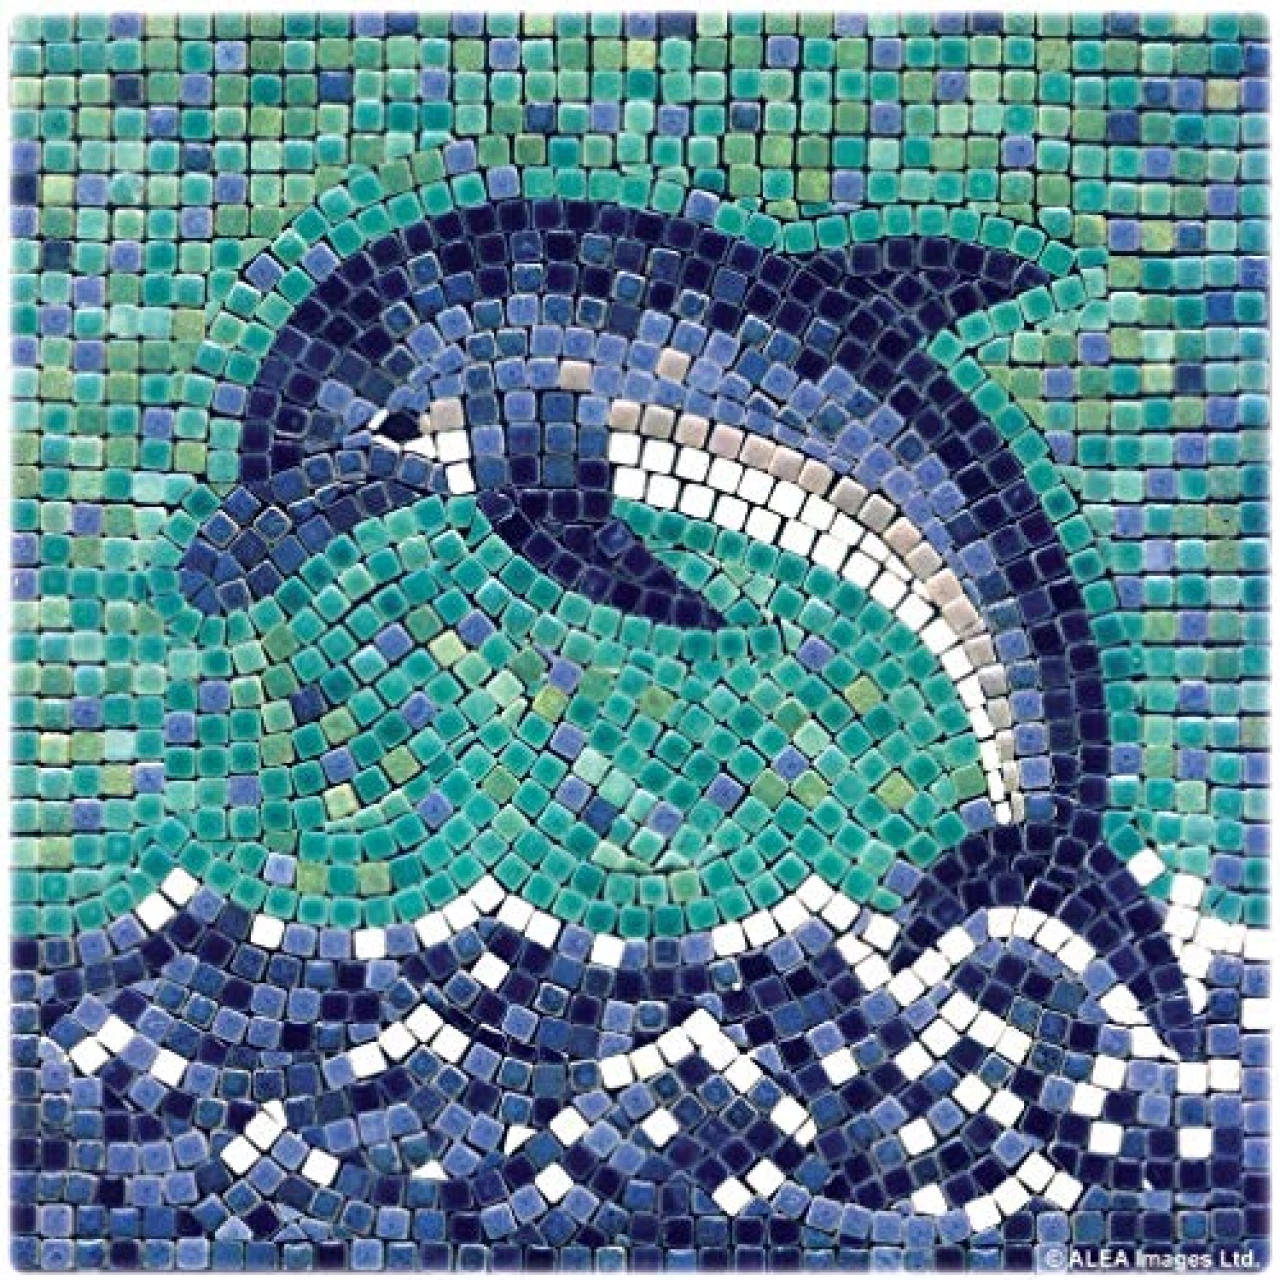 Handmade Mosaics Made Easy with Our Adult Mosaic Art Craft Kit